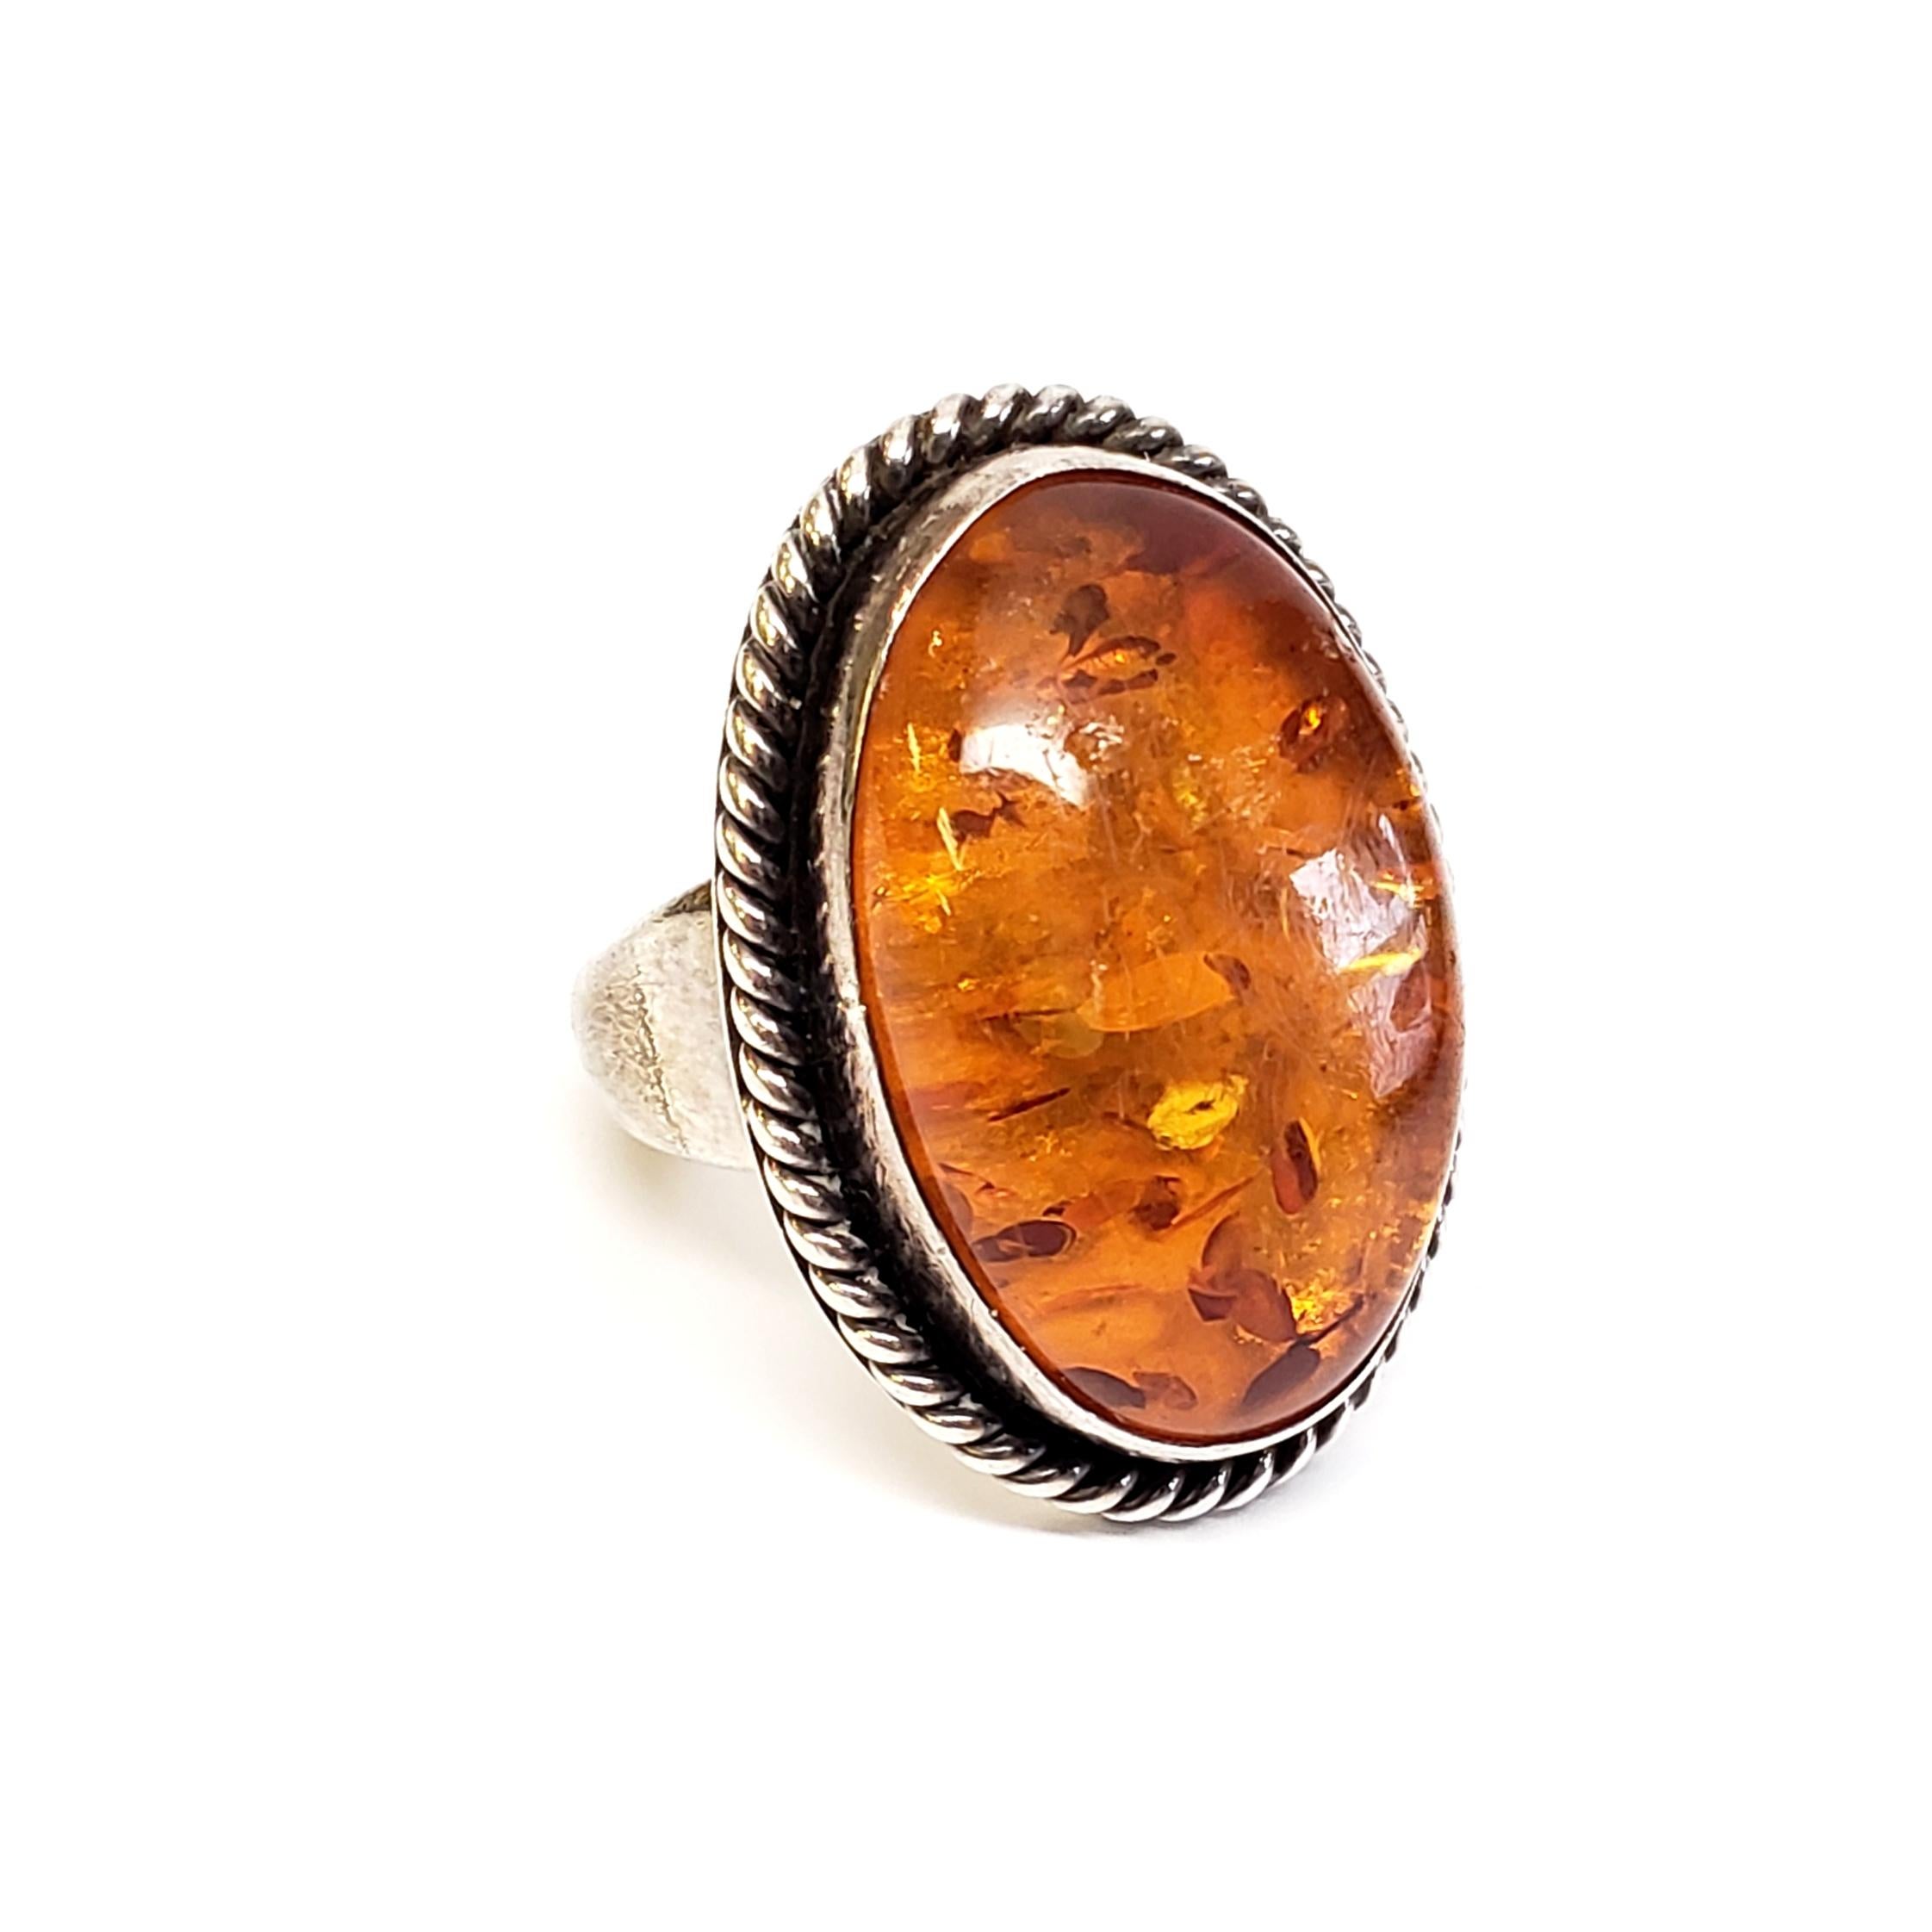 Sterling silver amber ring by Native American Navajo artisan, Artie Yellowhorse.

Size 6 3/4

Artie Yellowhorse is known for her contemporary designs combined with exceptional craftsmanship and quality materials. Her pieces are truly wearable art.